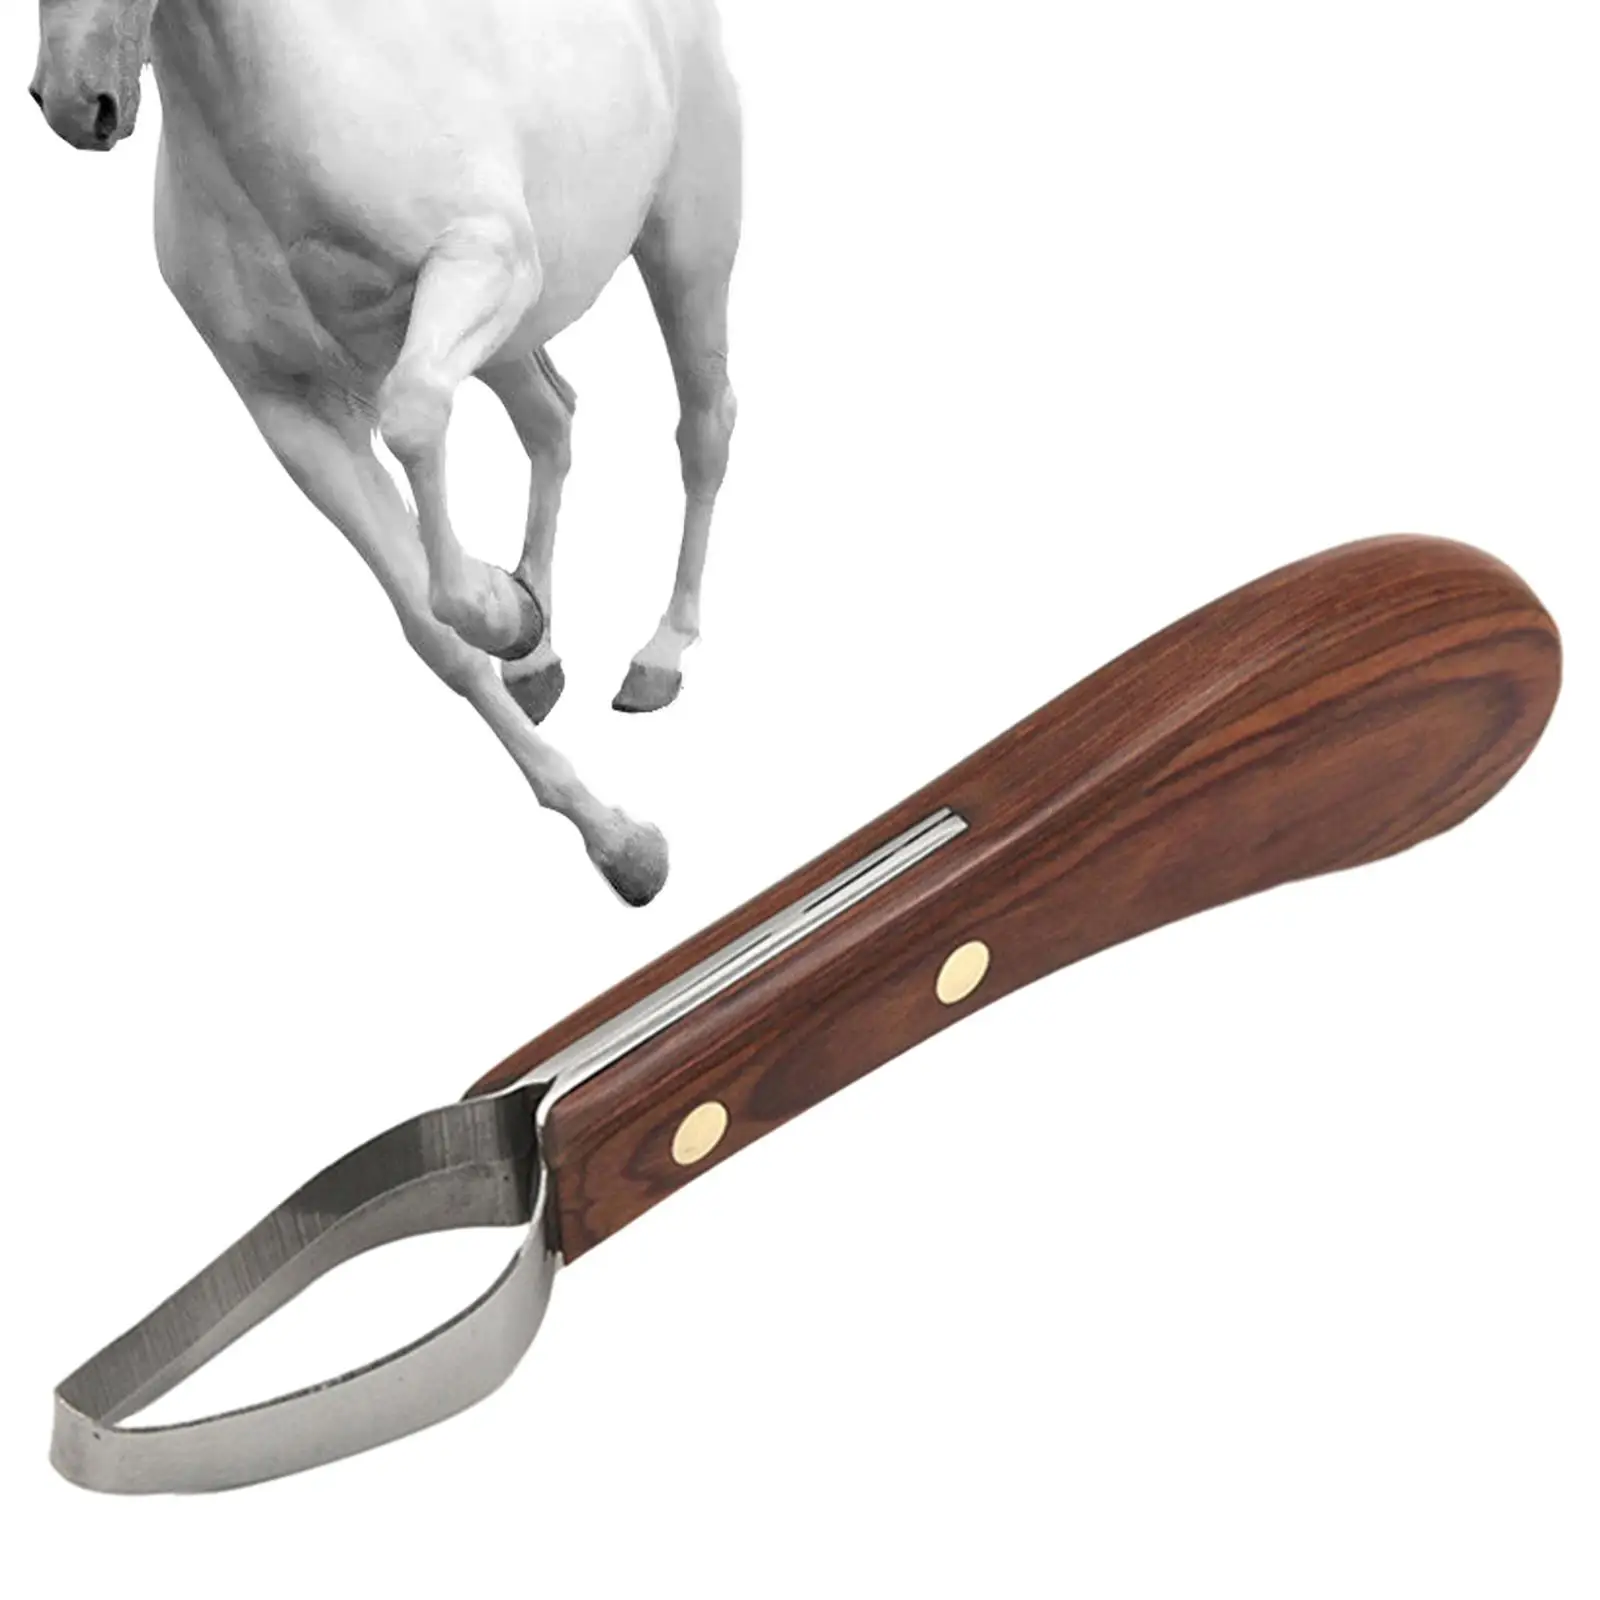 Hoof Knife Right or Left Handed Stainless Steel Trimmer Professional Hoof Cutting Tool for Pig Goats Sheep Cattle Farm Animal